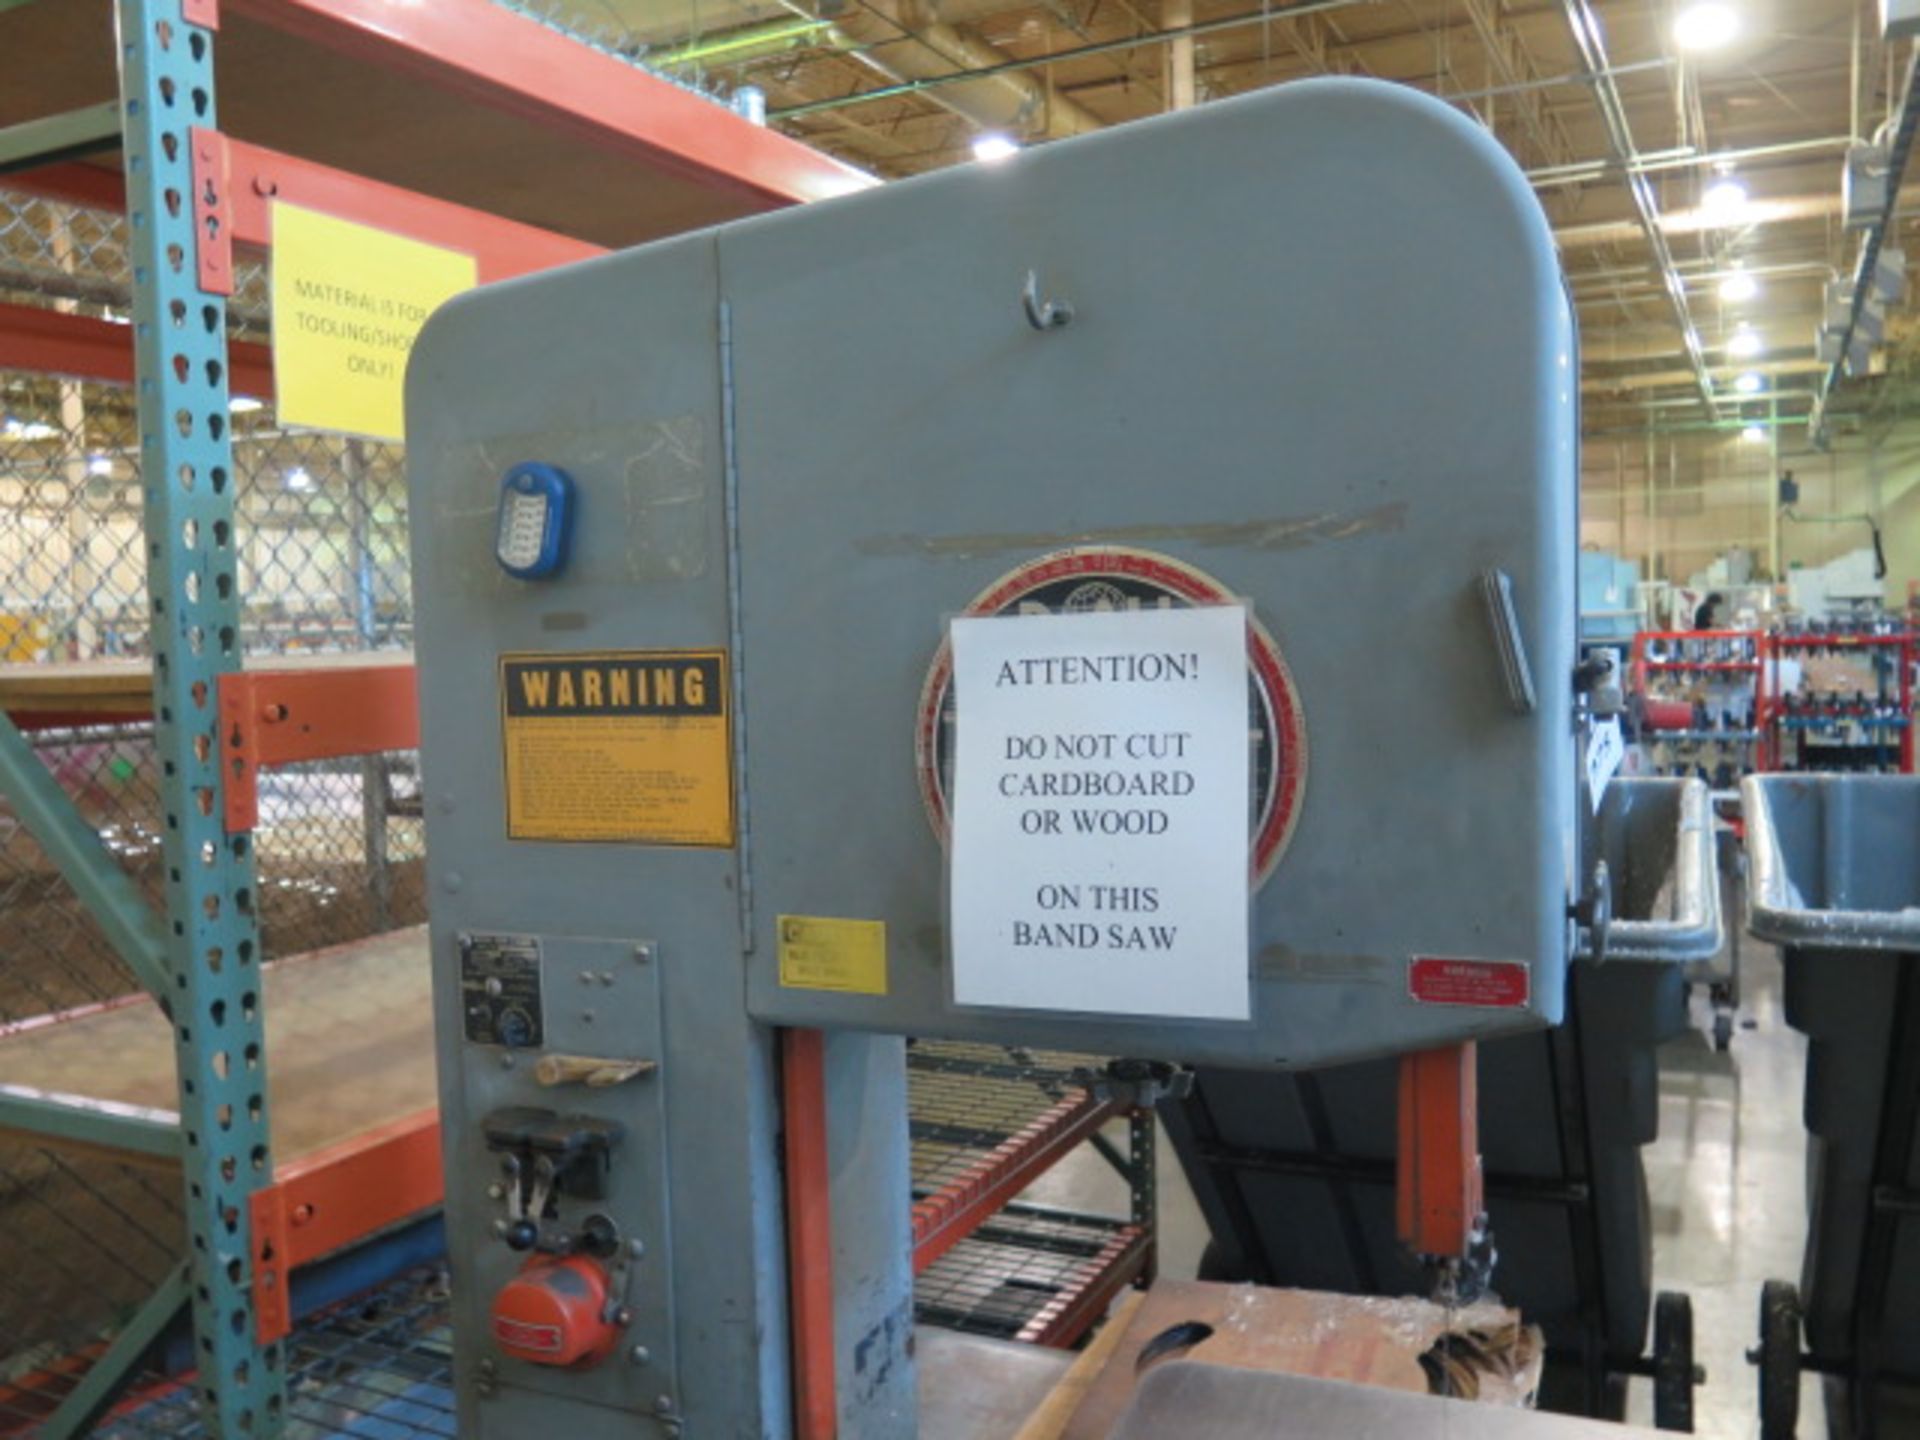 DoAll 2013-U 20” Vertical Band Saw s/n 411-81265 w/ Blade Welder, 24” x 24” Table (SOLD AS-IS - NO - Image 3 of 8